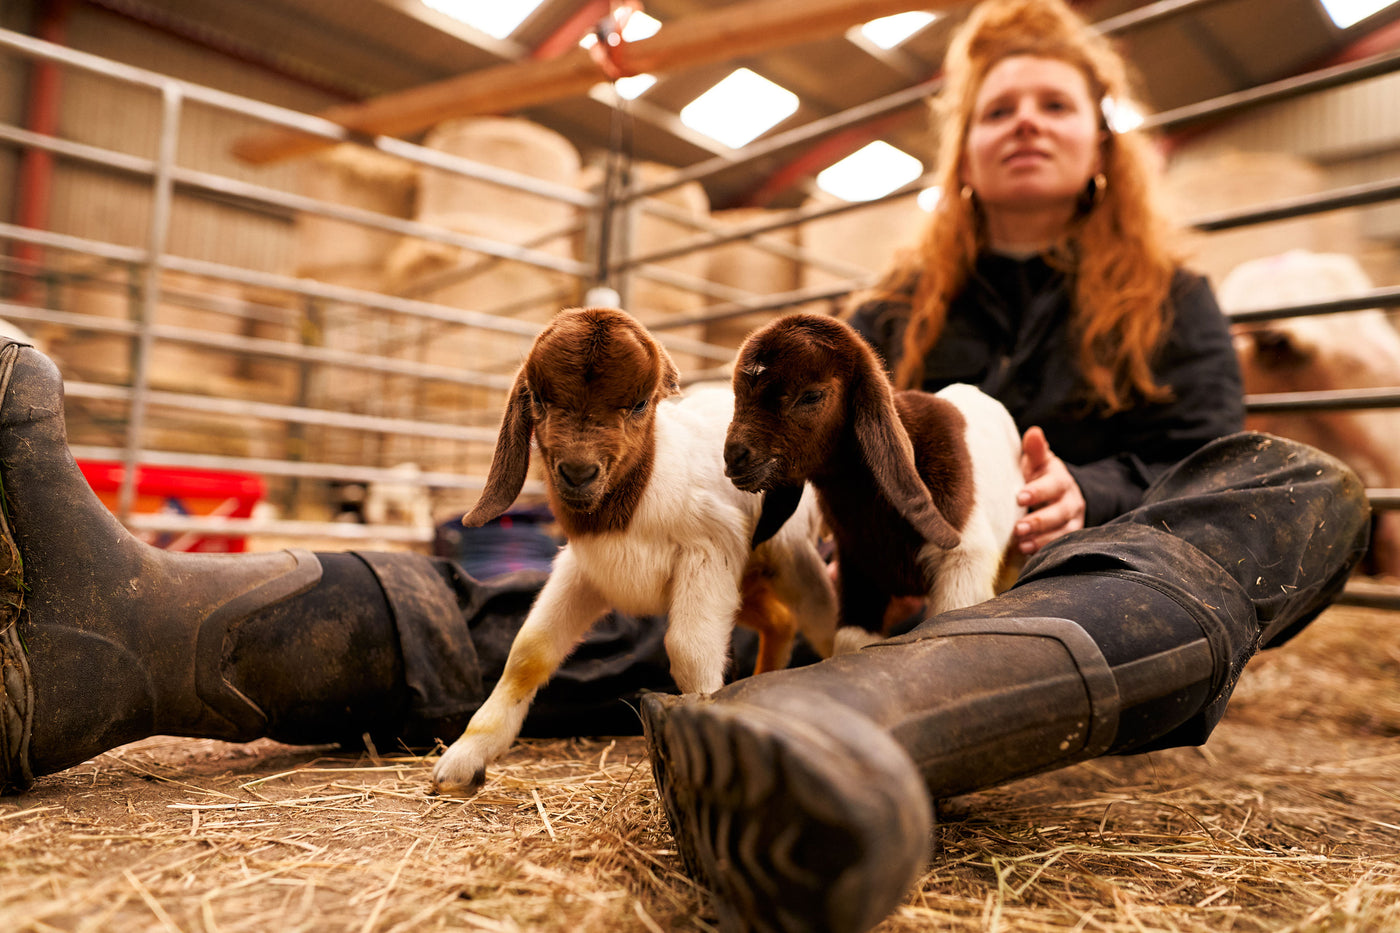 Zoe Colville sat in a barn with two lambs, wearing a pair of Muck Boots